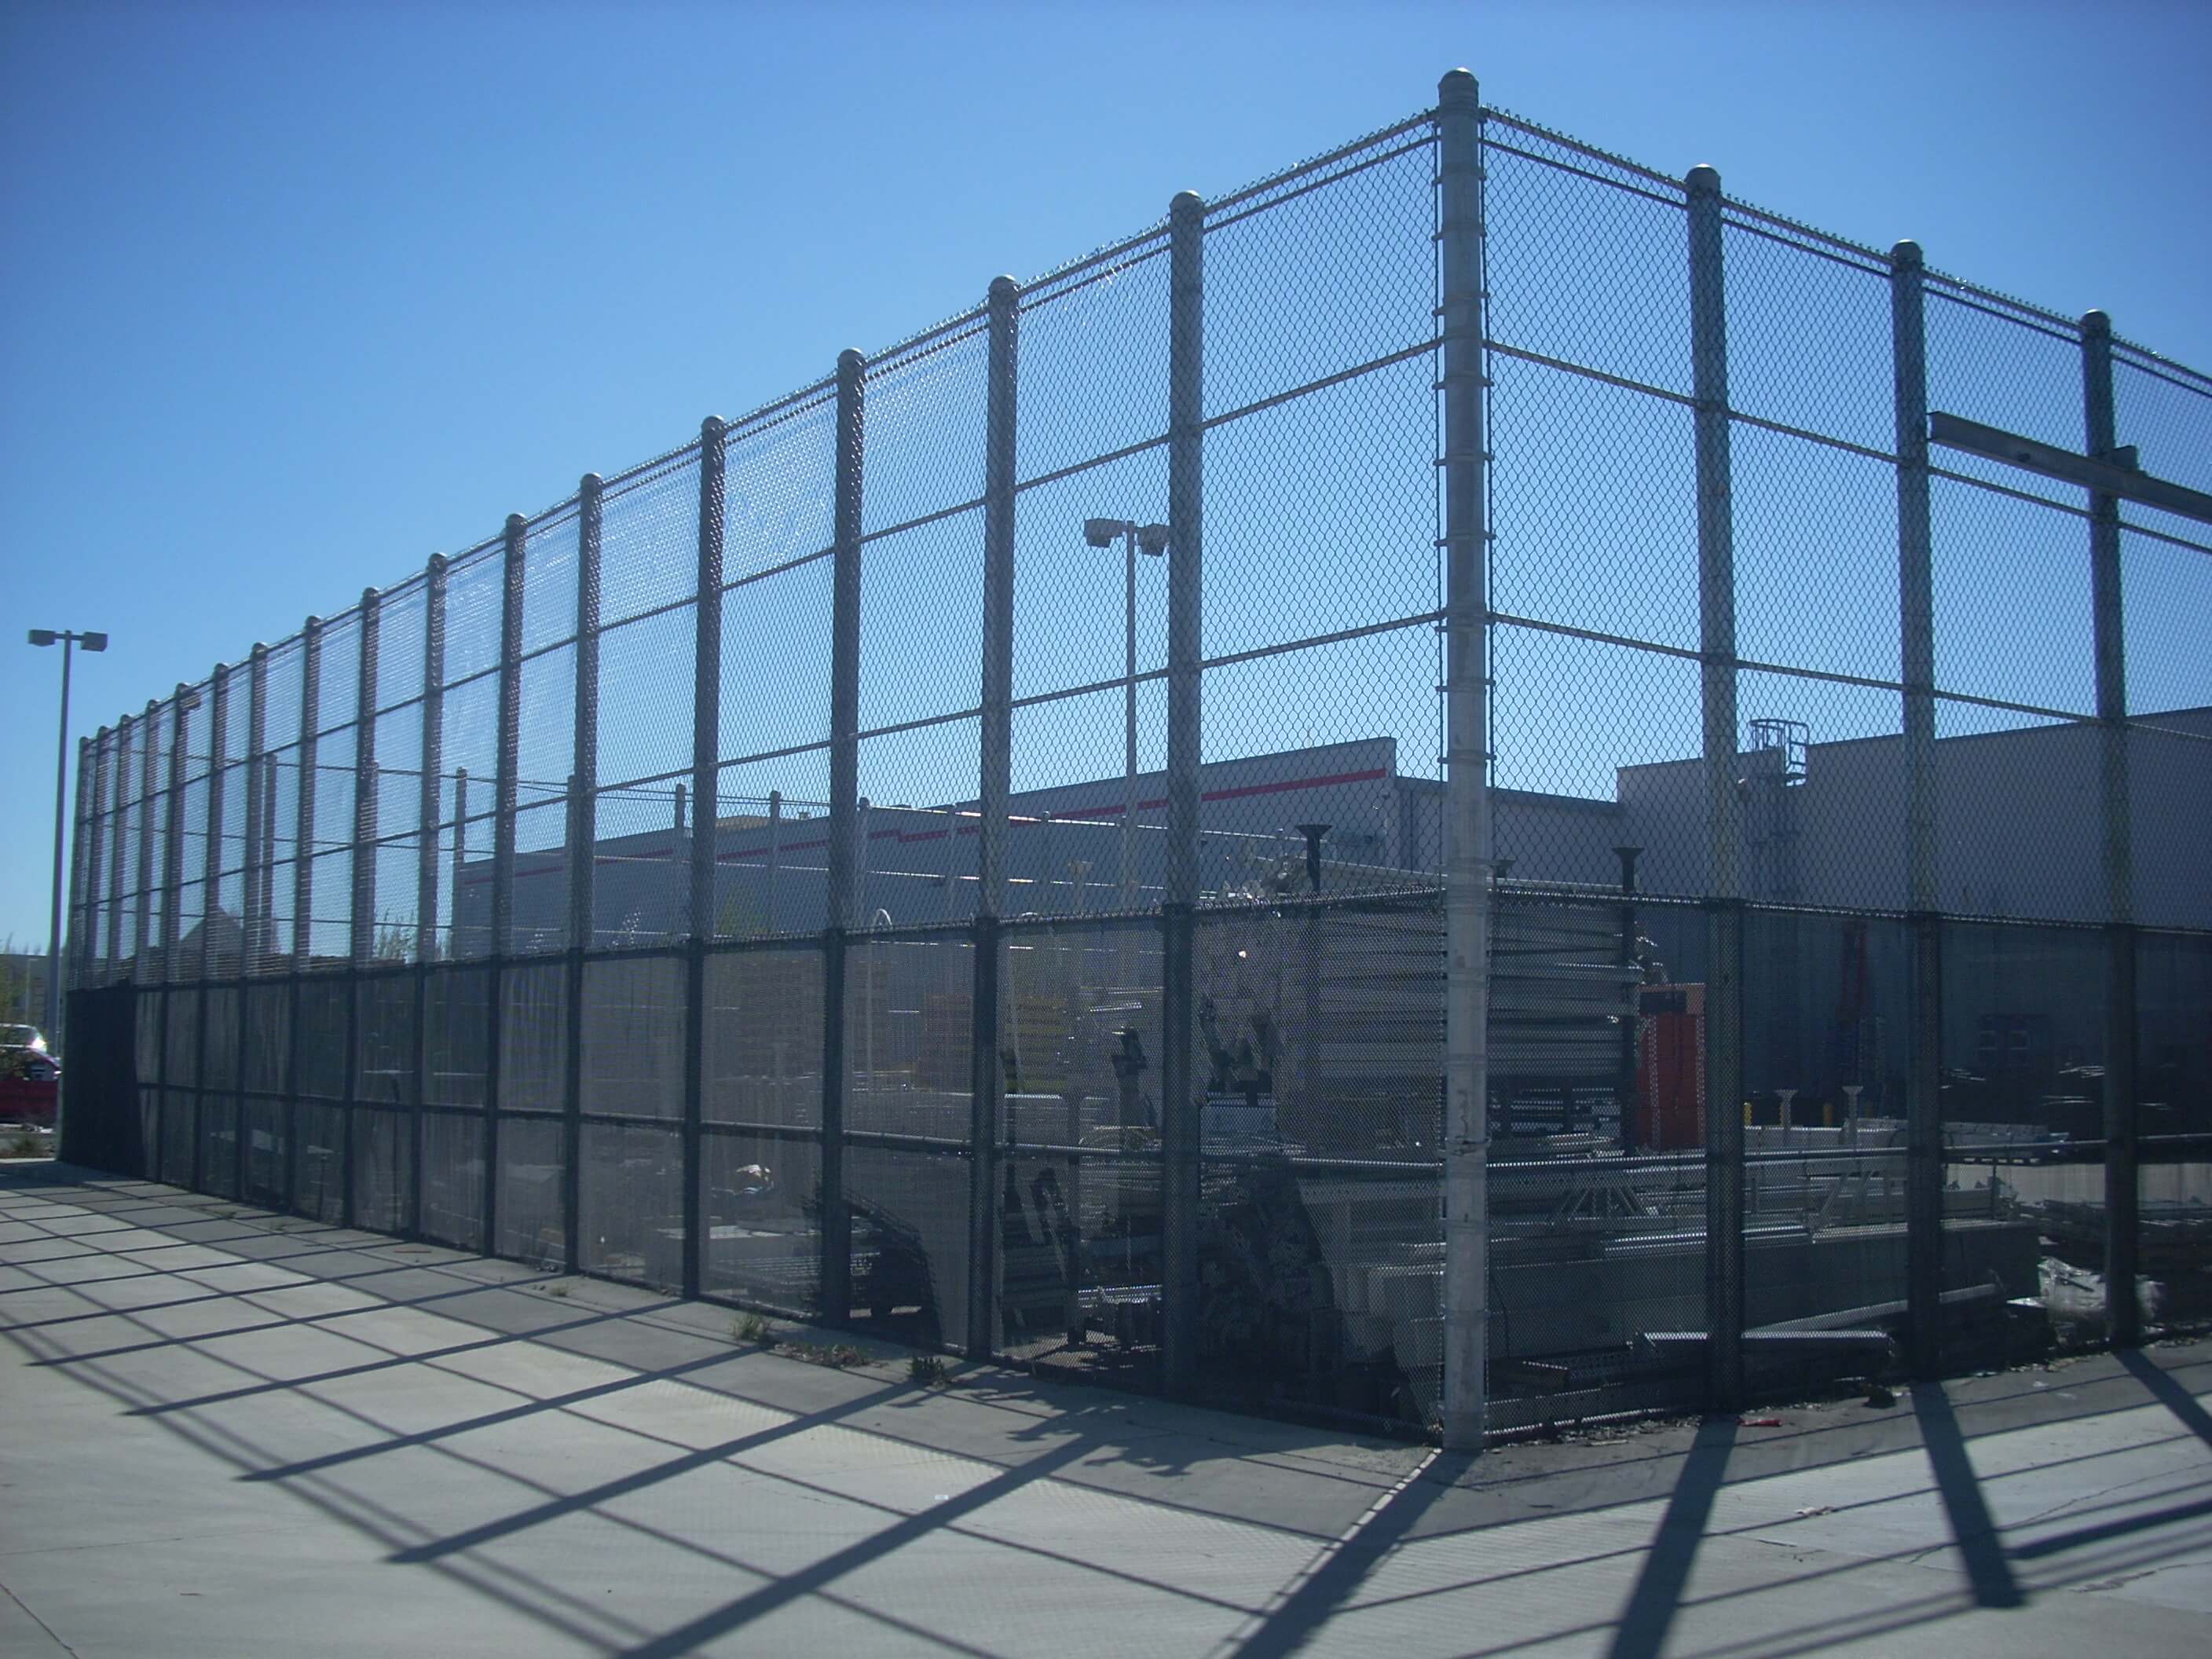 What Makes Chainlink Fencing a Popular Choice for Tennis Courts?